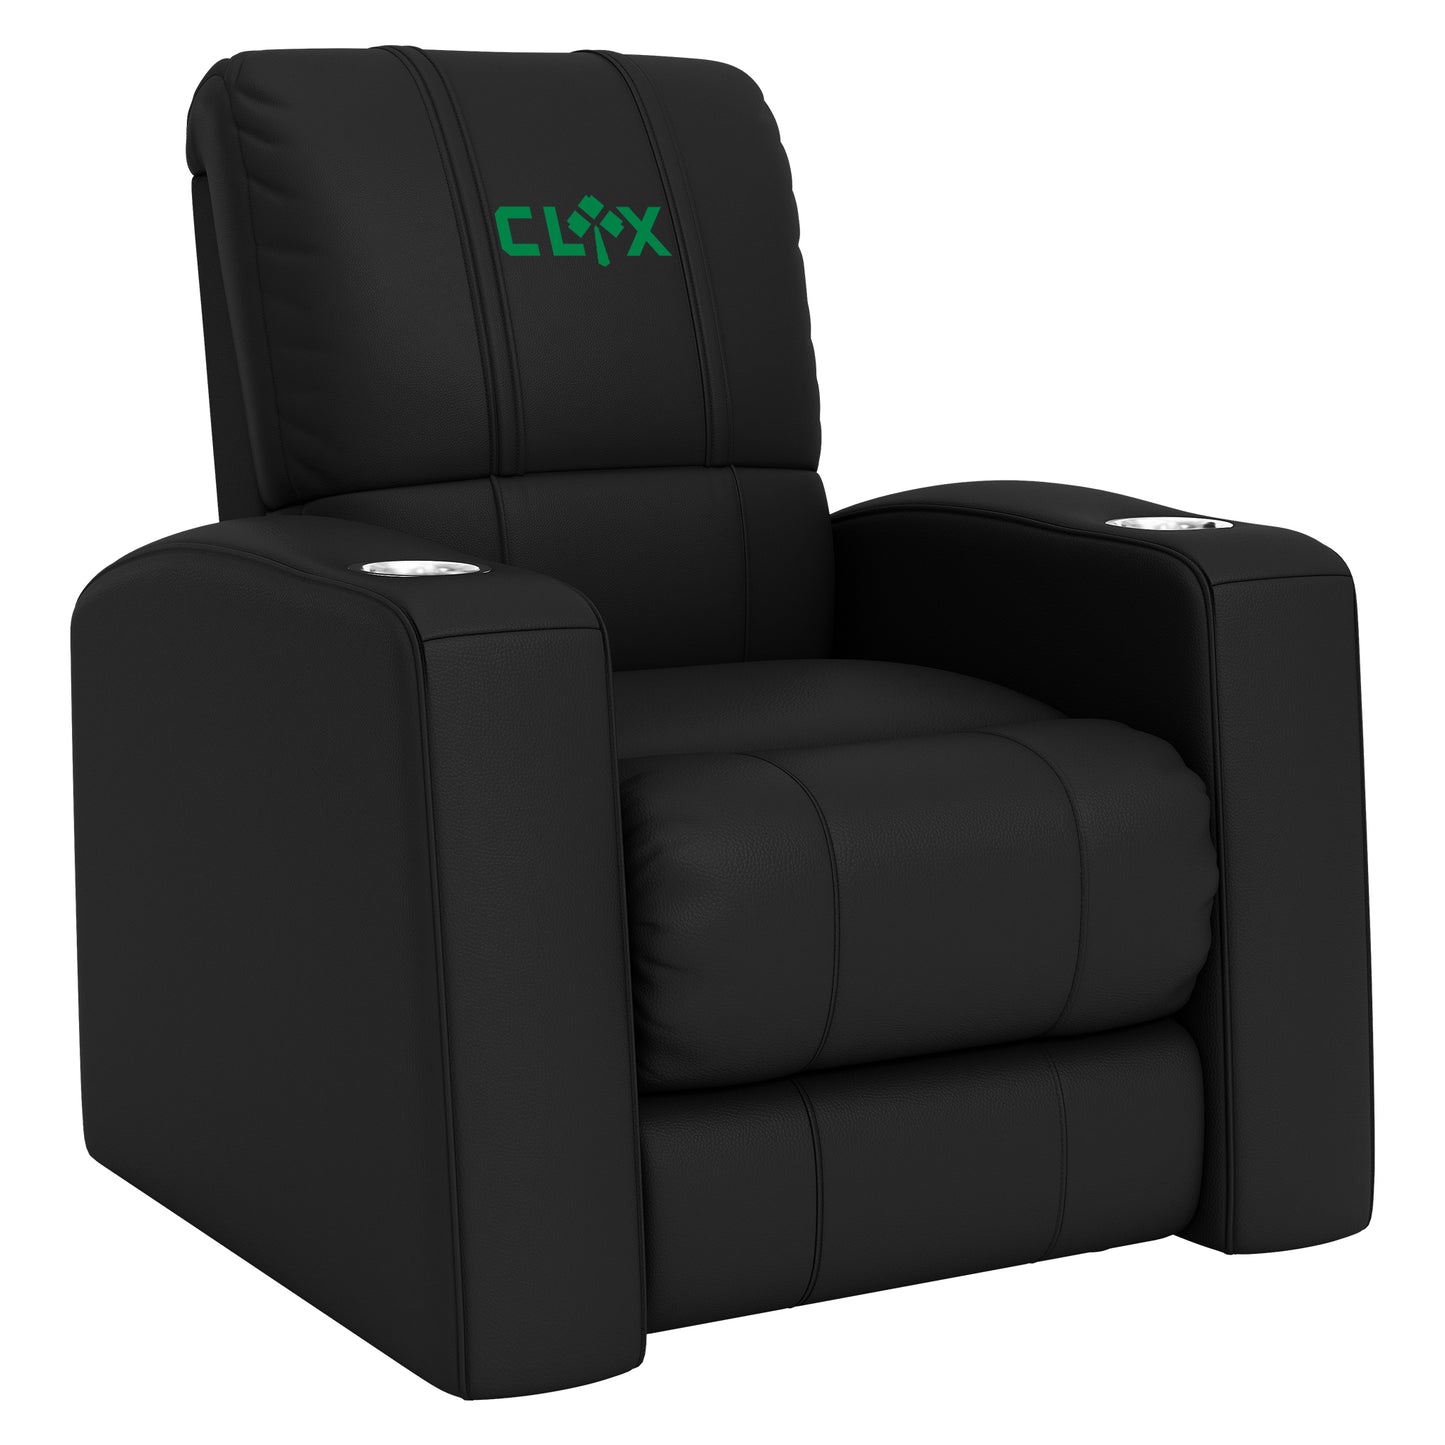 Relax Home Theater Recliner with Celtics Crossover Gaming Wordmark Green [CAN ONLY BE SHIPPED TO MASSACHUSETTS]